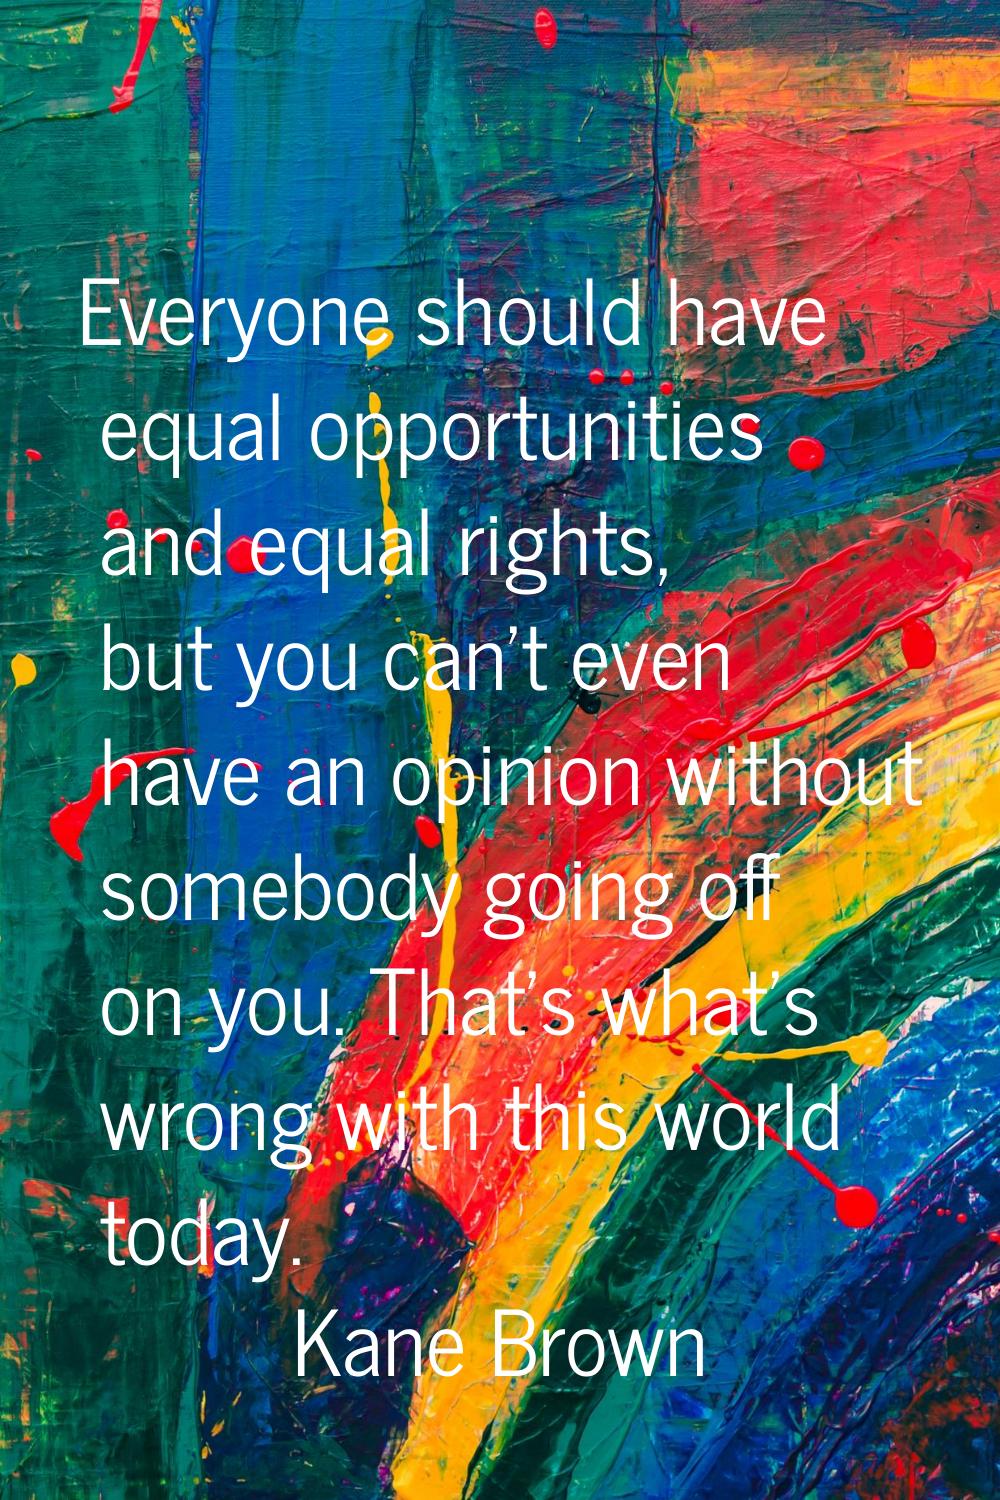 Everyone should have equal opportunities and equal rights, but you can't even have an opinion witho